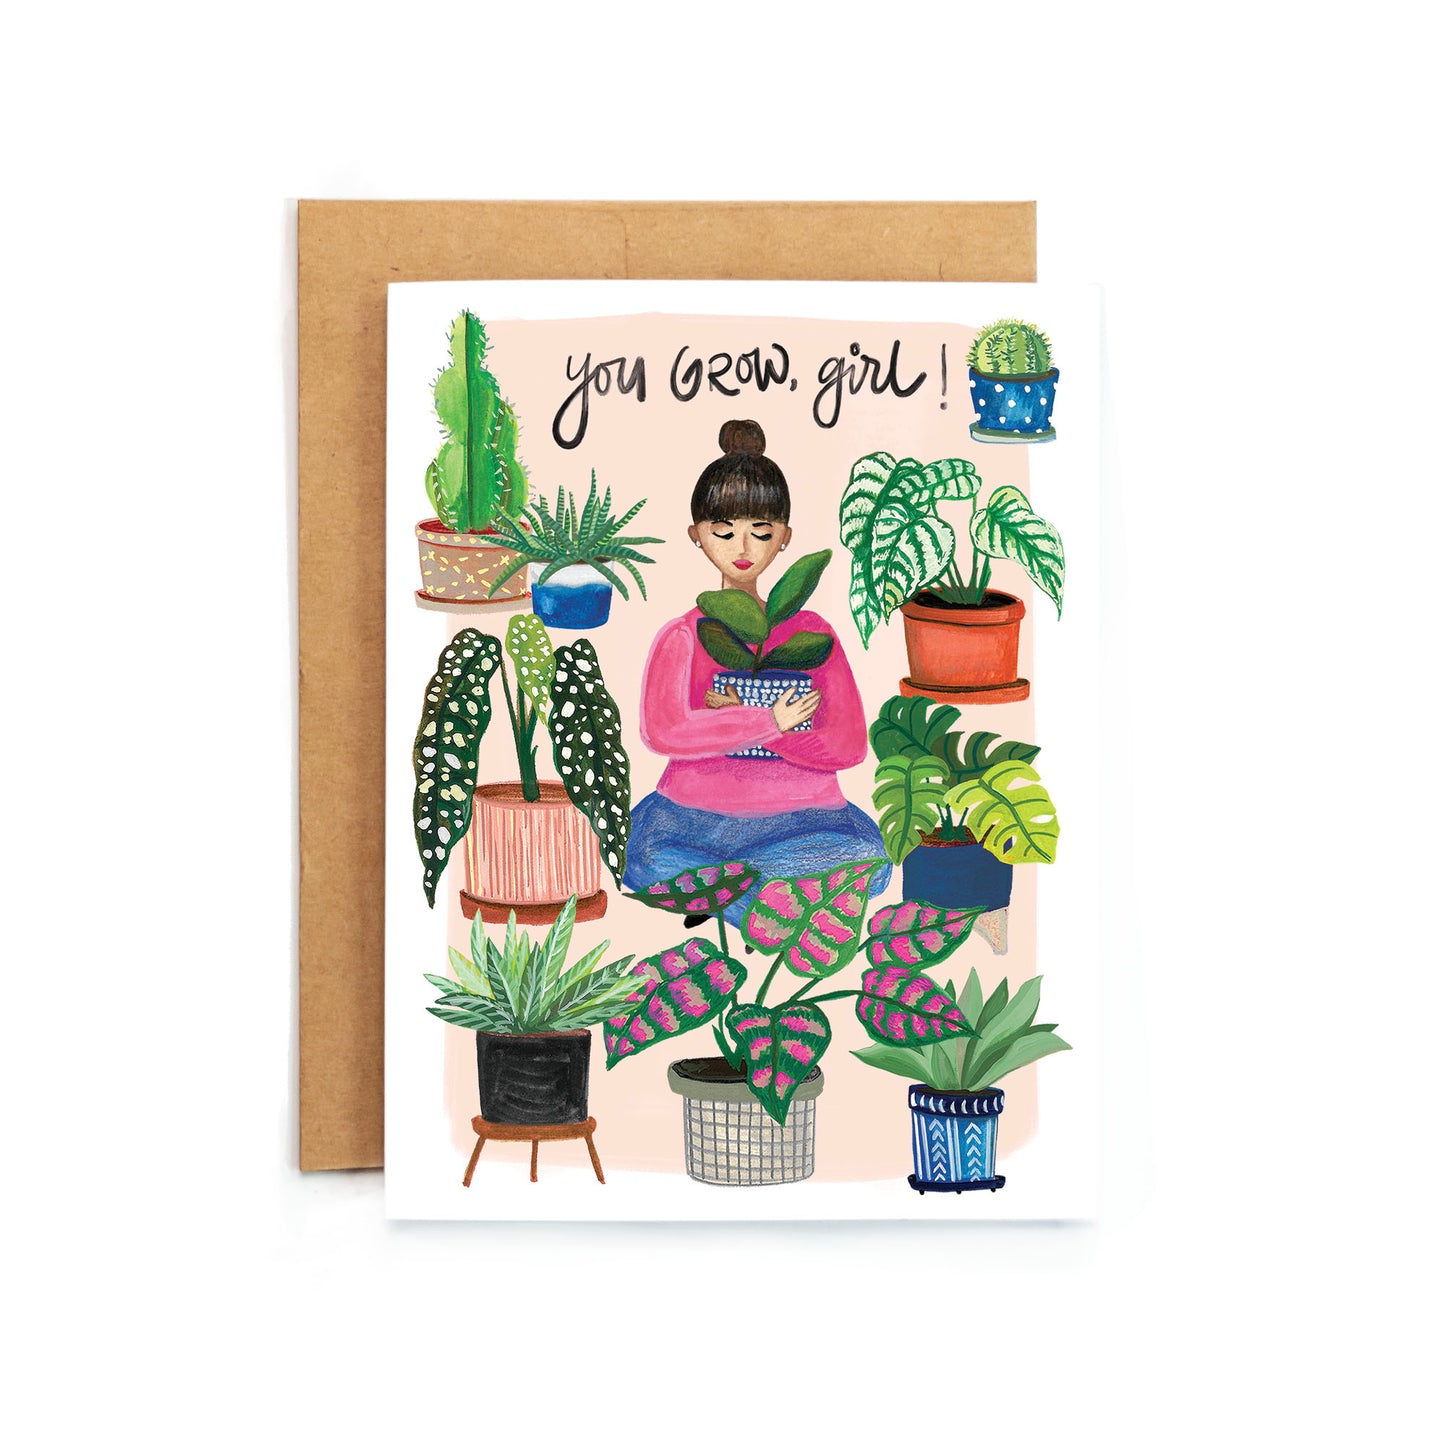 a card with a woman holding a potted plant